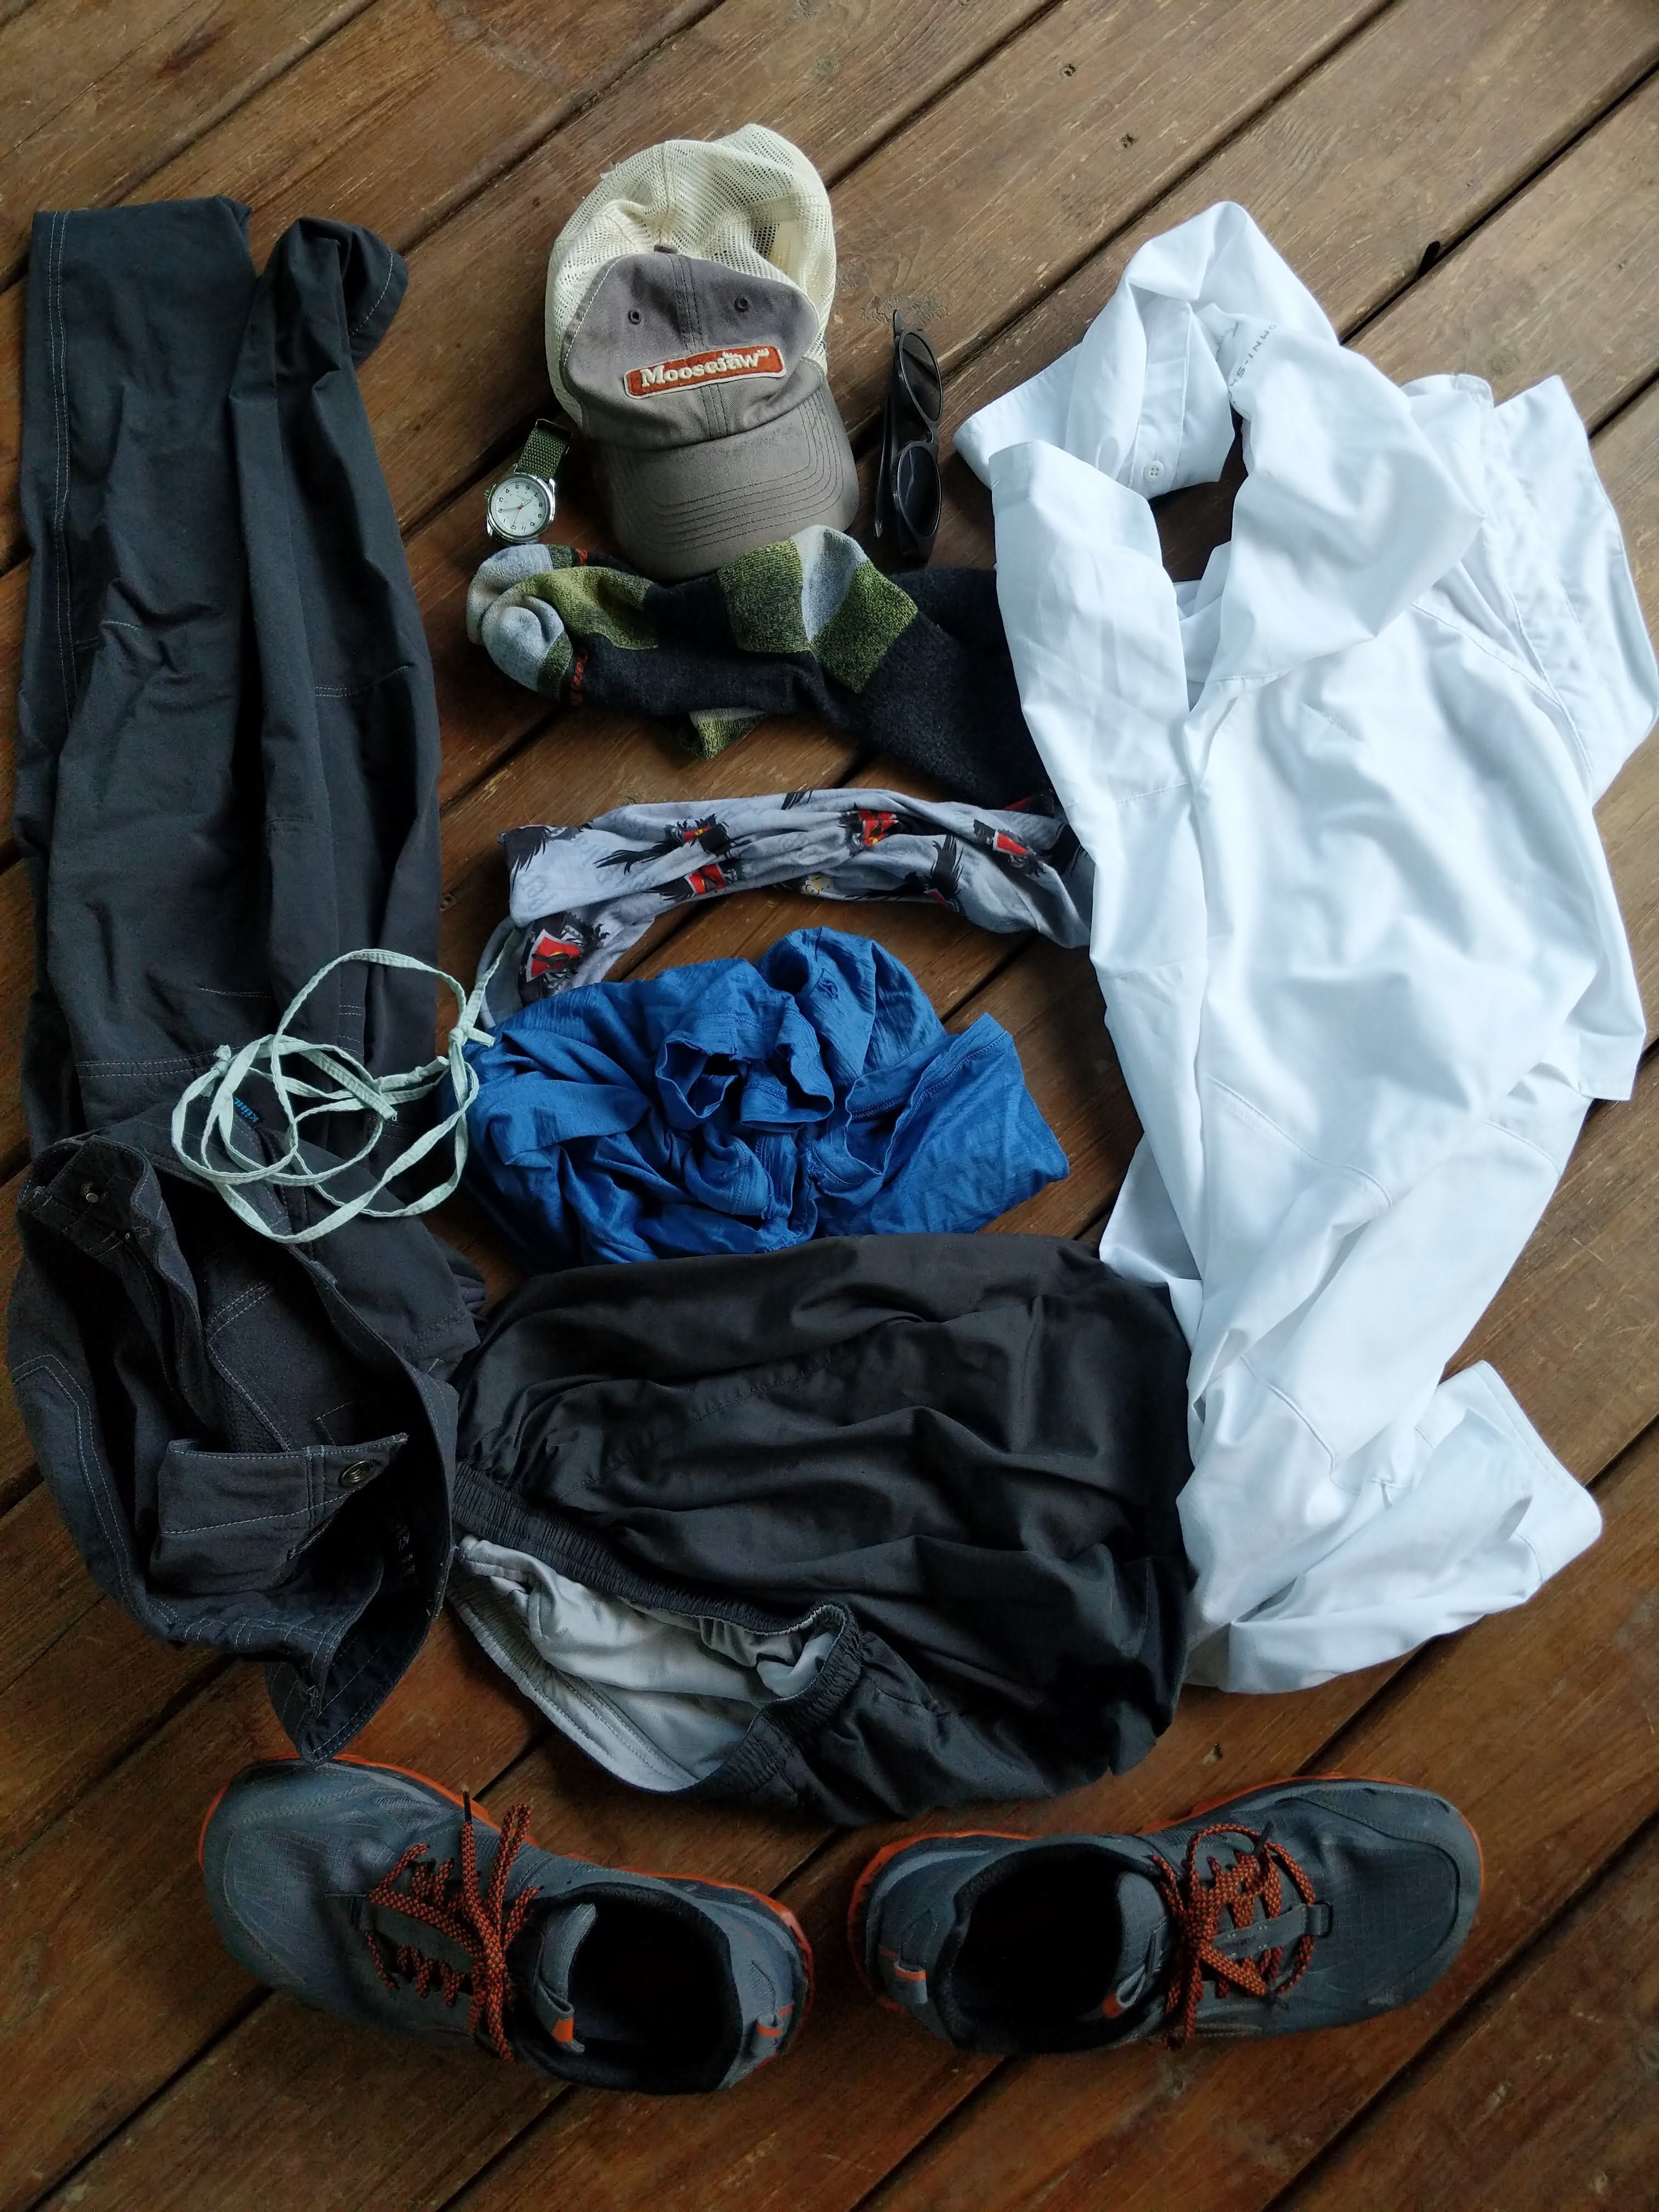 Worn gear for hiking in to first camp